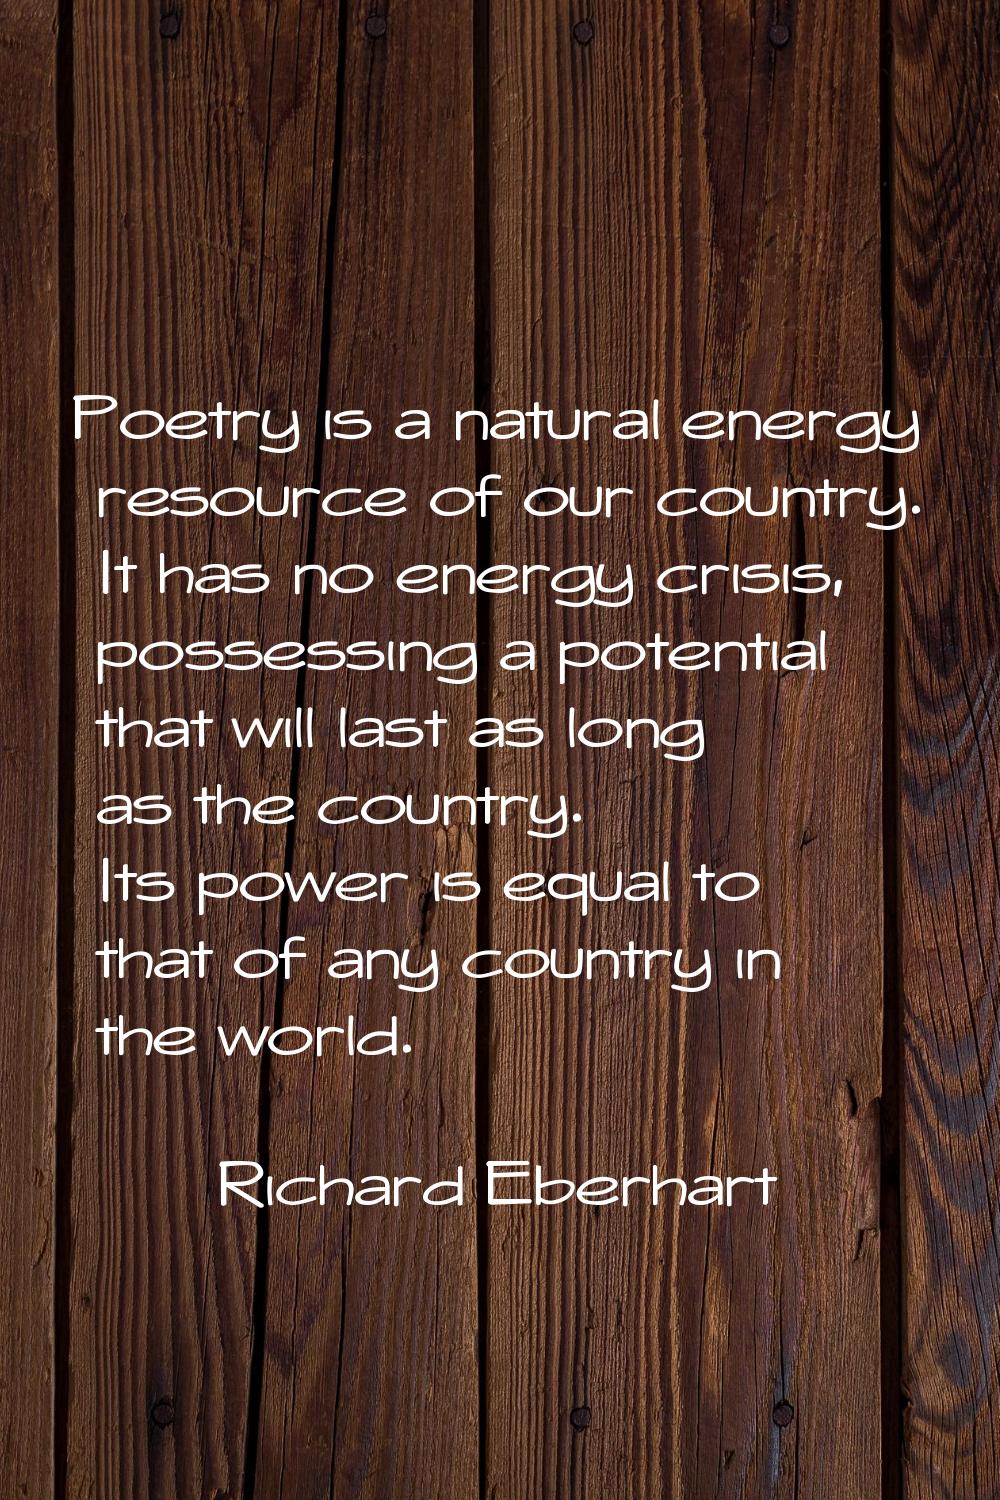 Poetry is a natural energy resource of our country. It has no energy crisis, possessing a potential